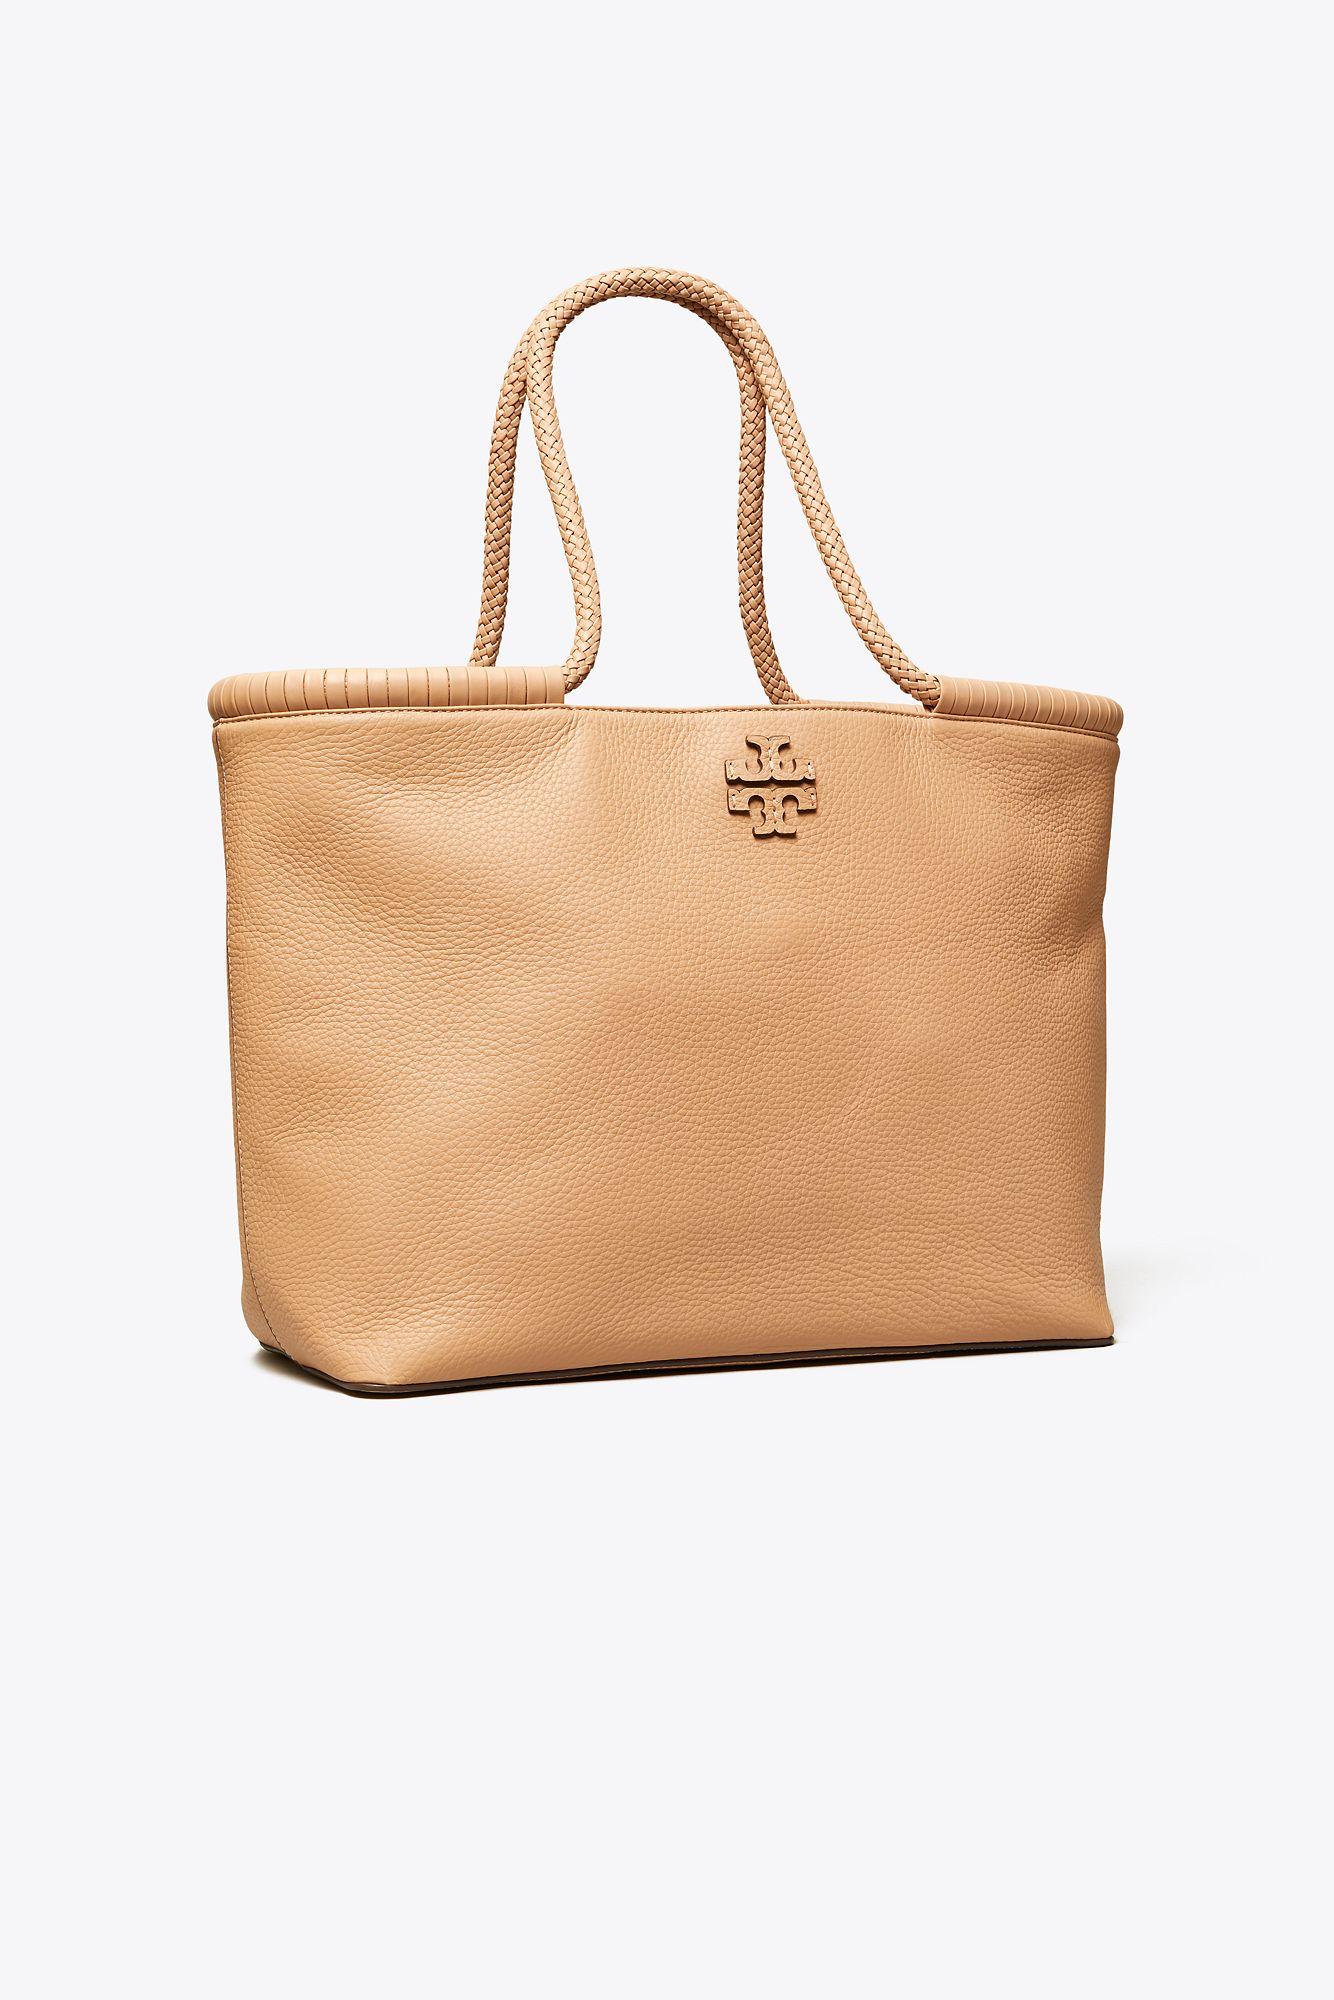 Tory Burch Taylor Tote in Natural | Lyst